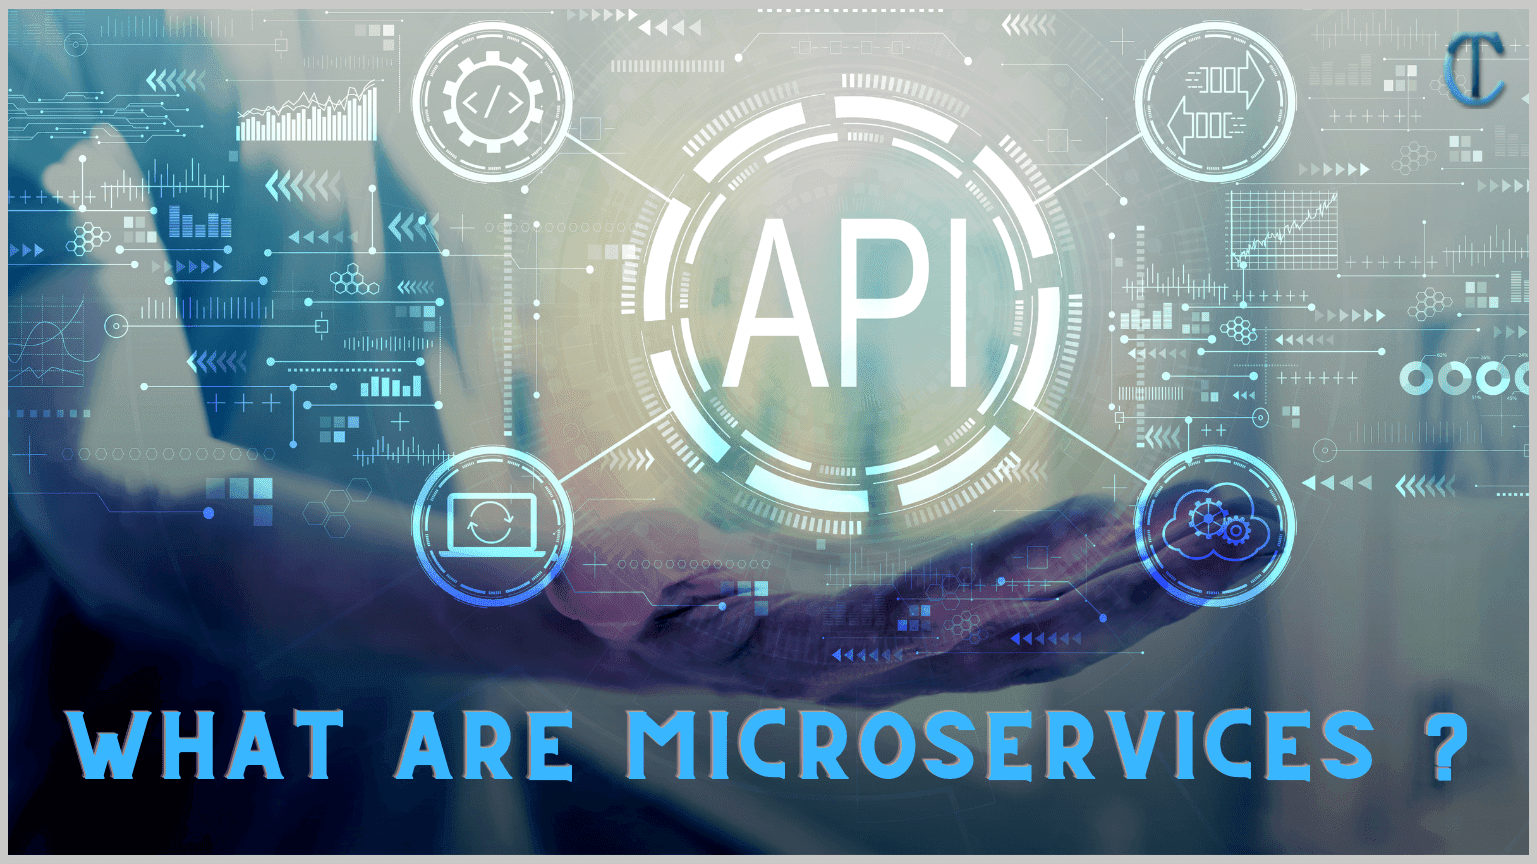 What are microservices? - Training | Microsoft Learn